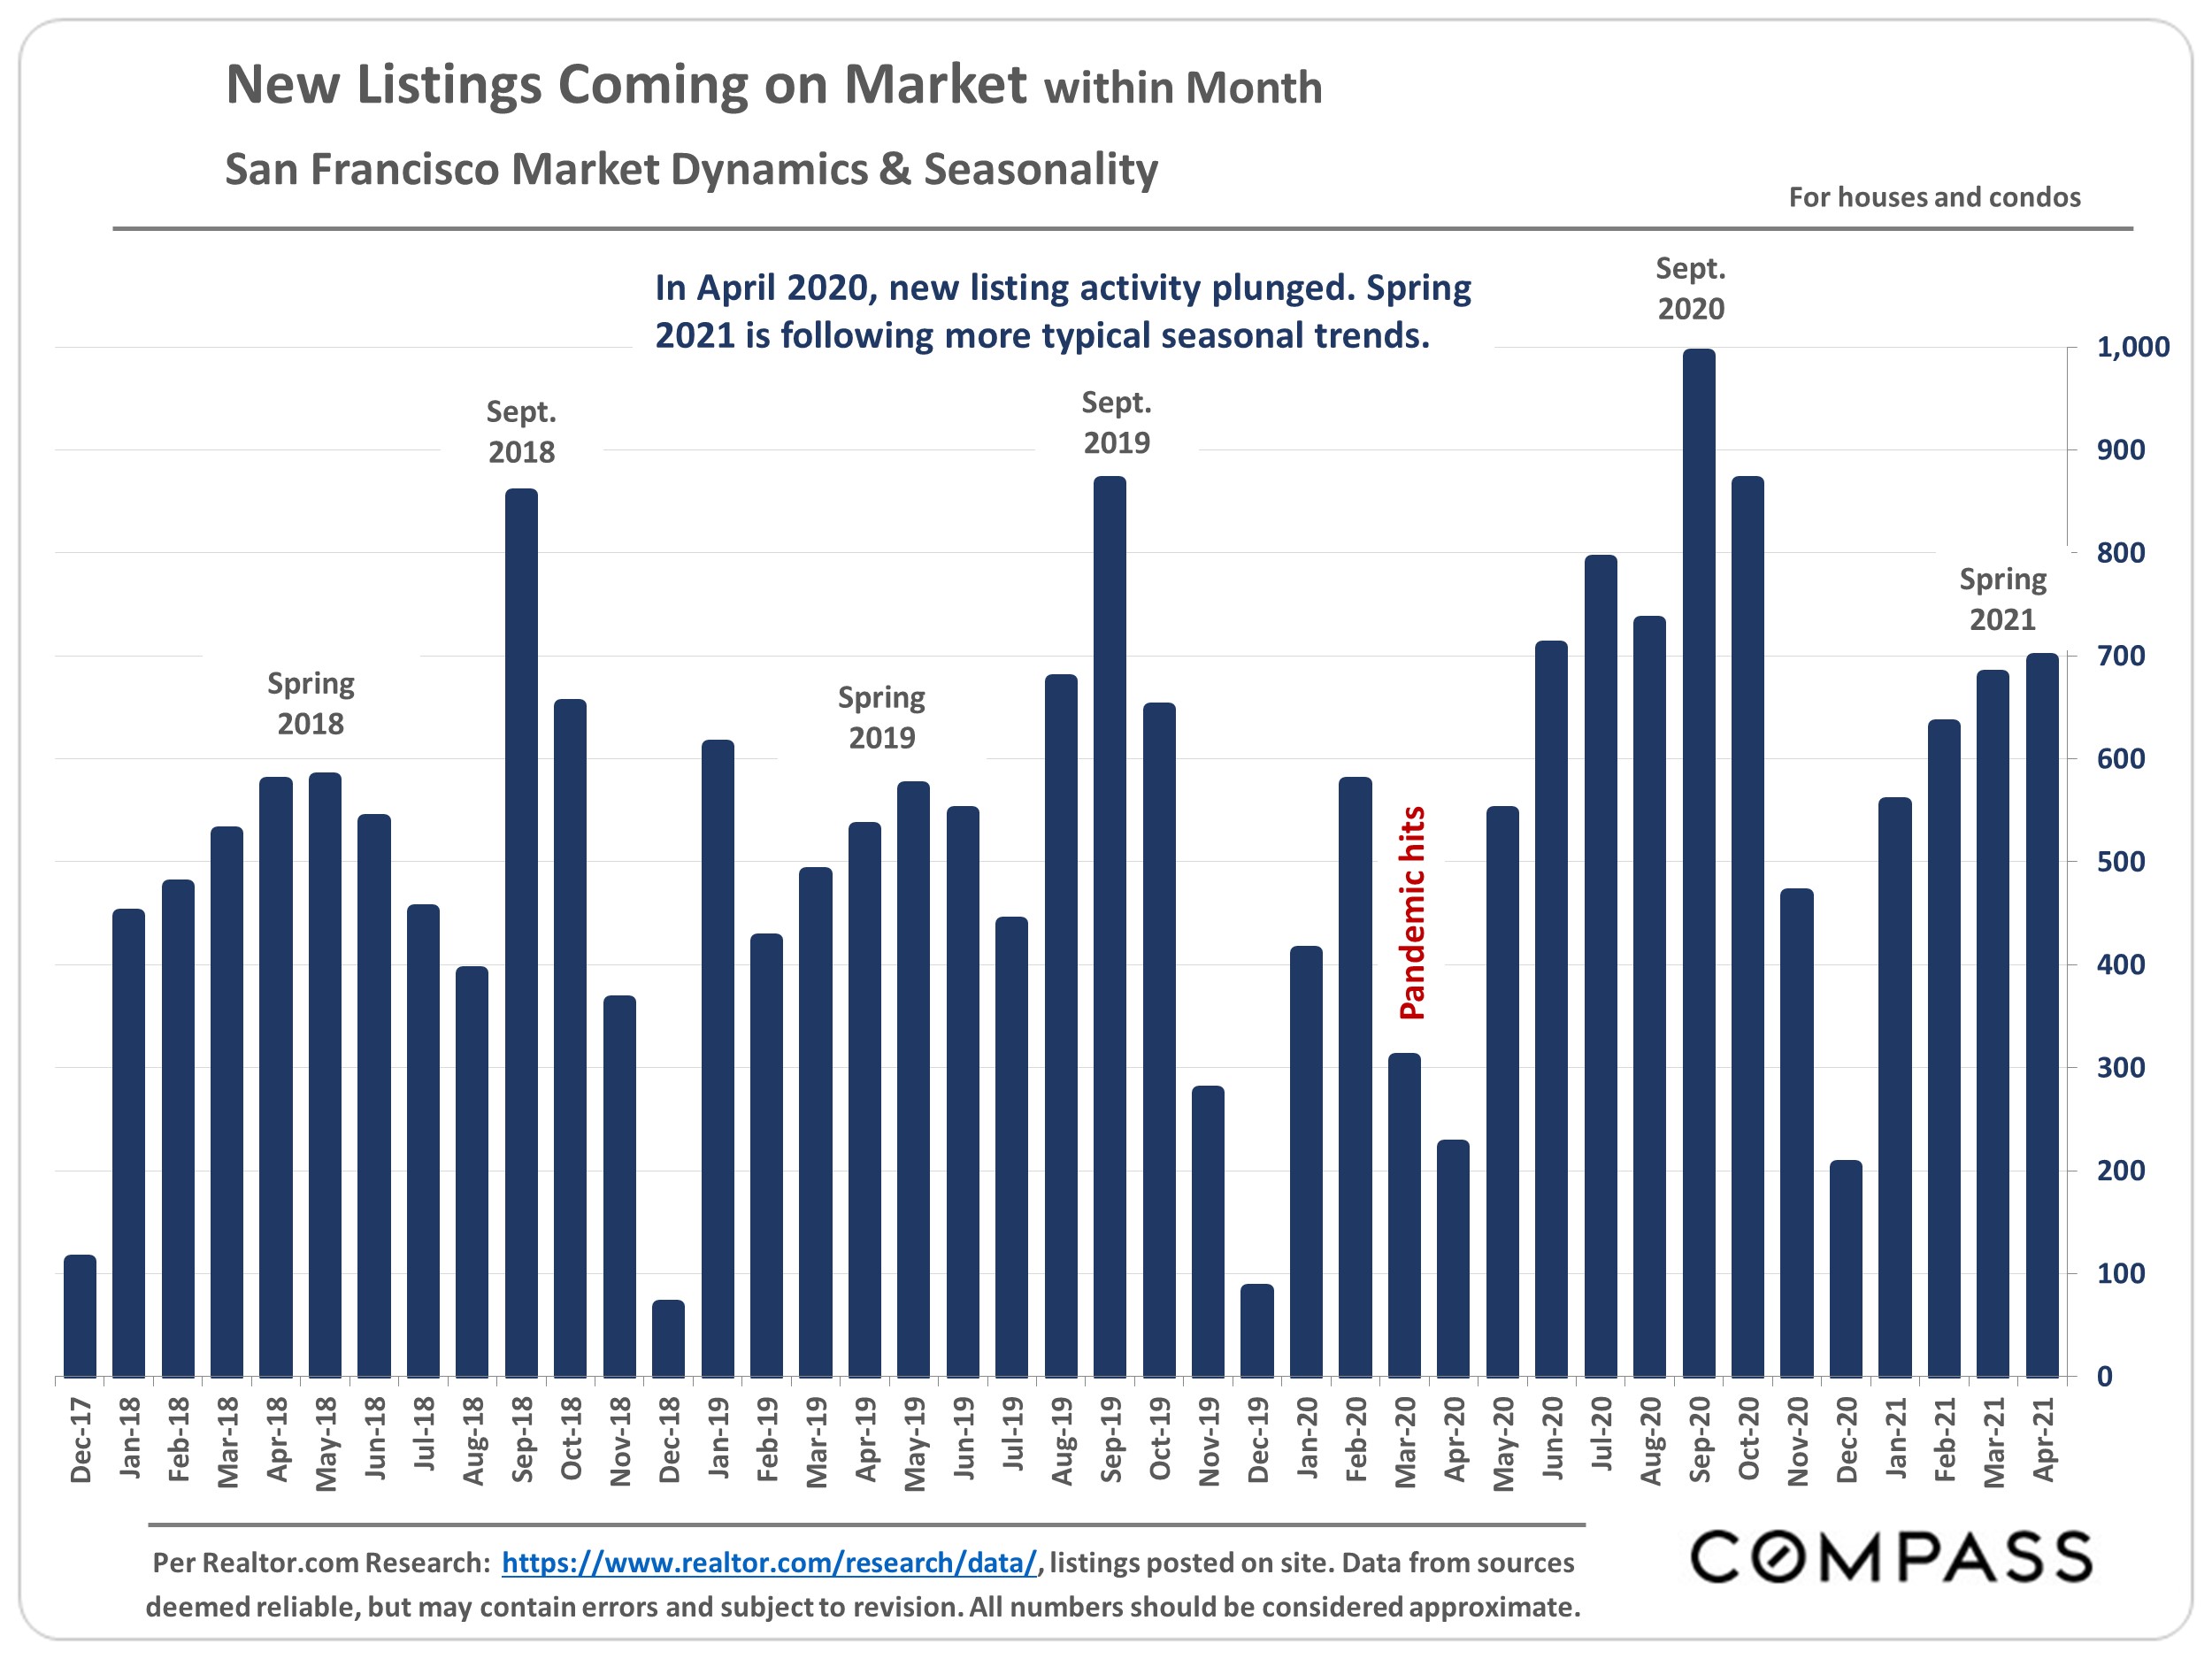 Chart showing the New Listings Coming on Market within Month, San Francisco Market Dynamics & Seasonality